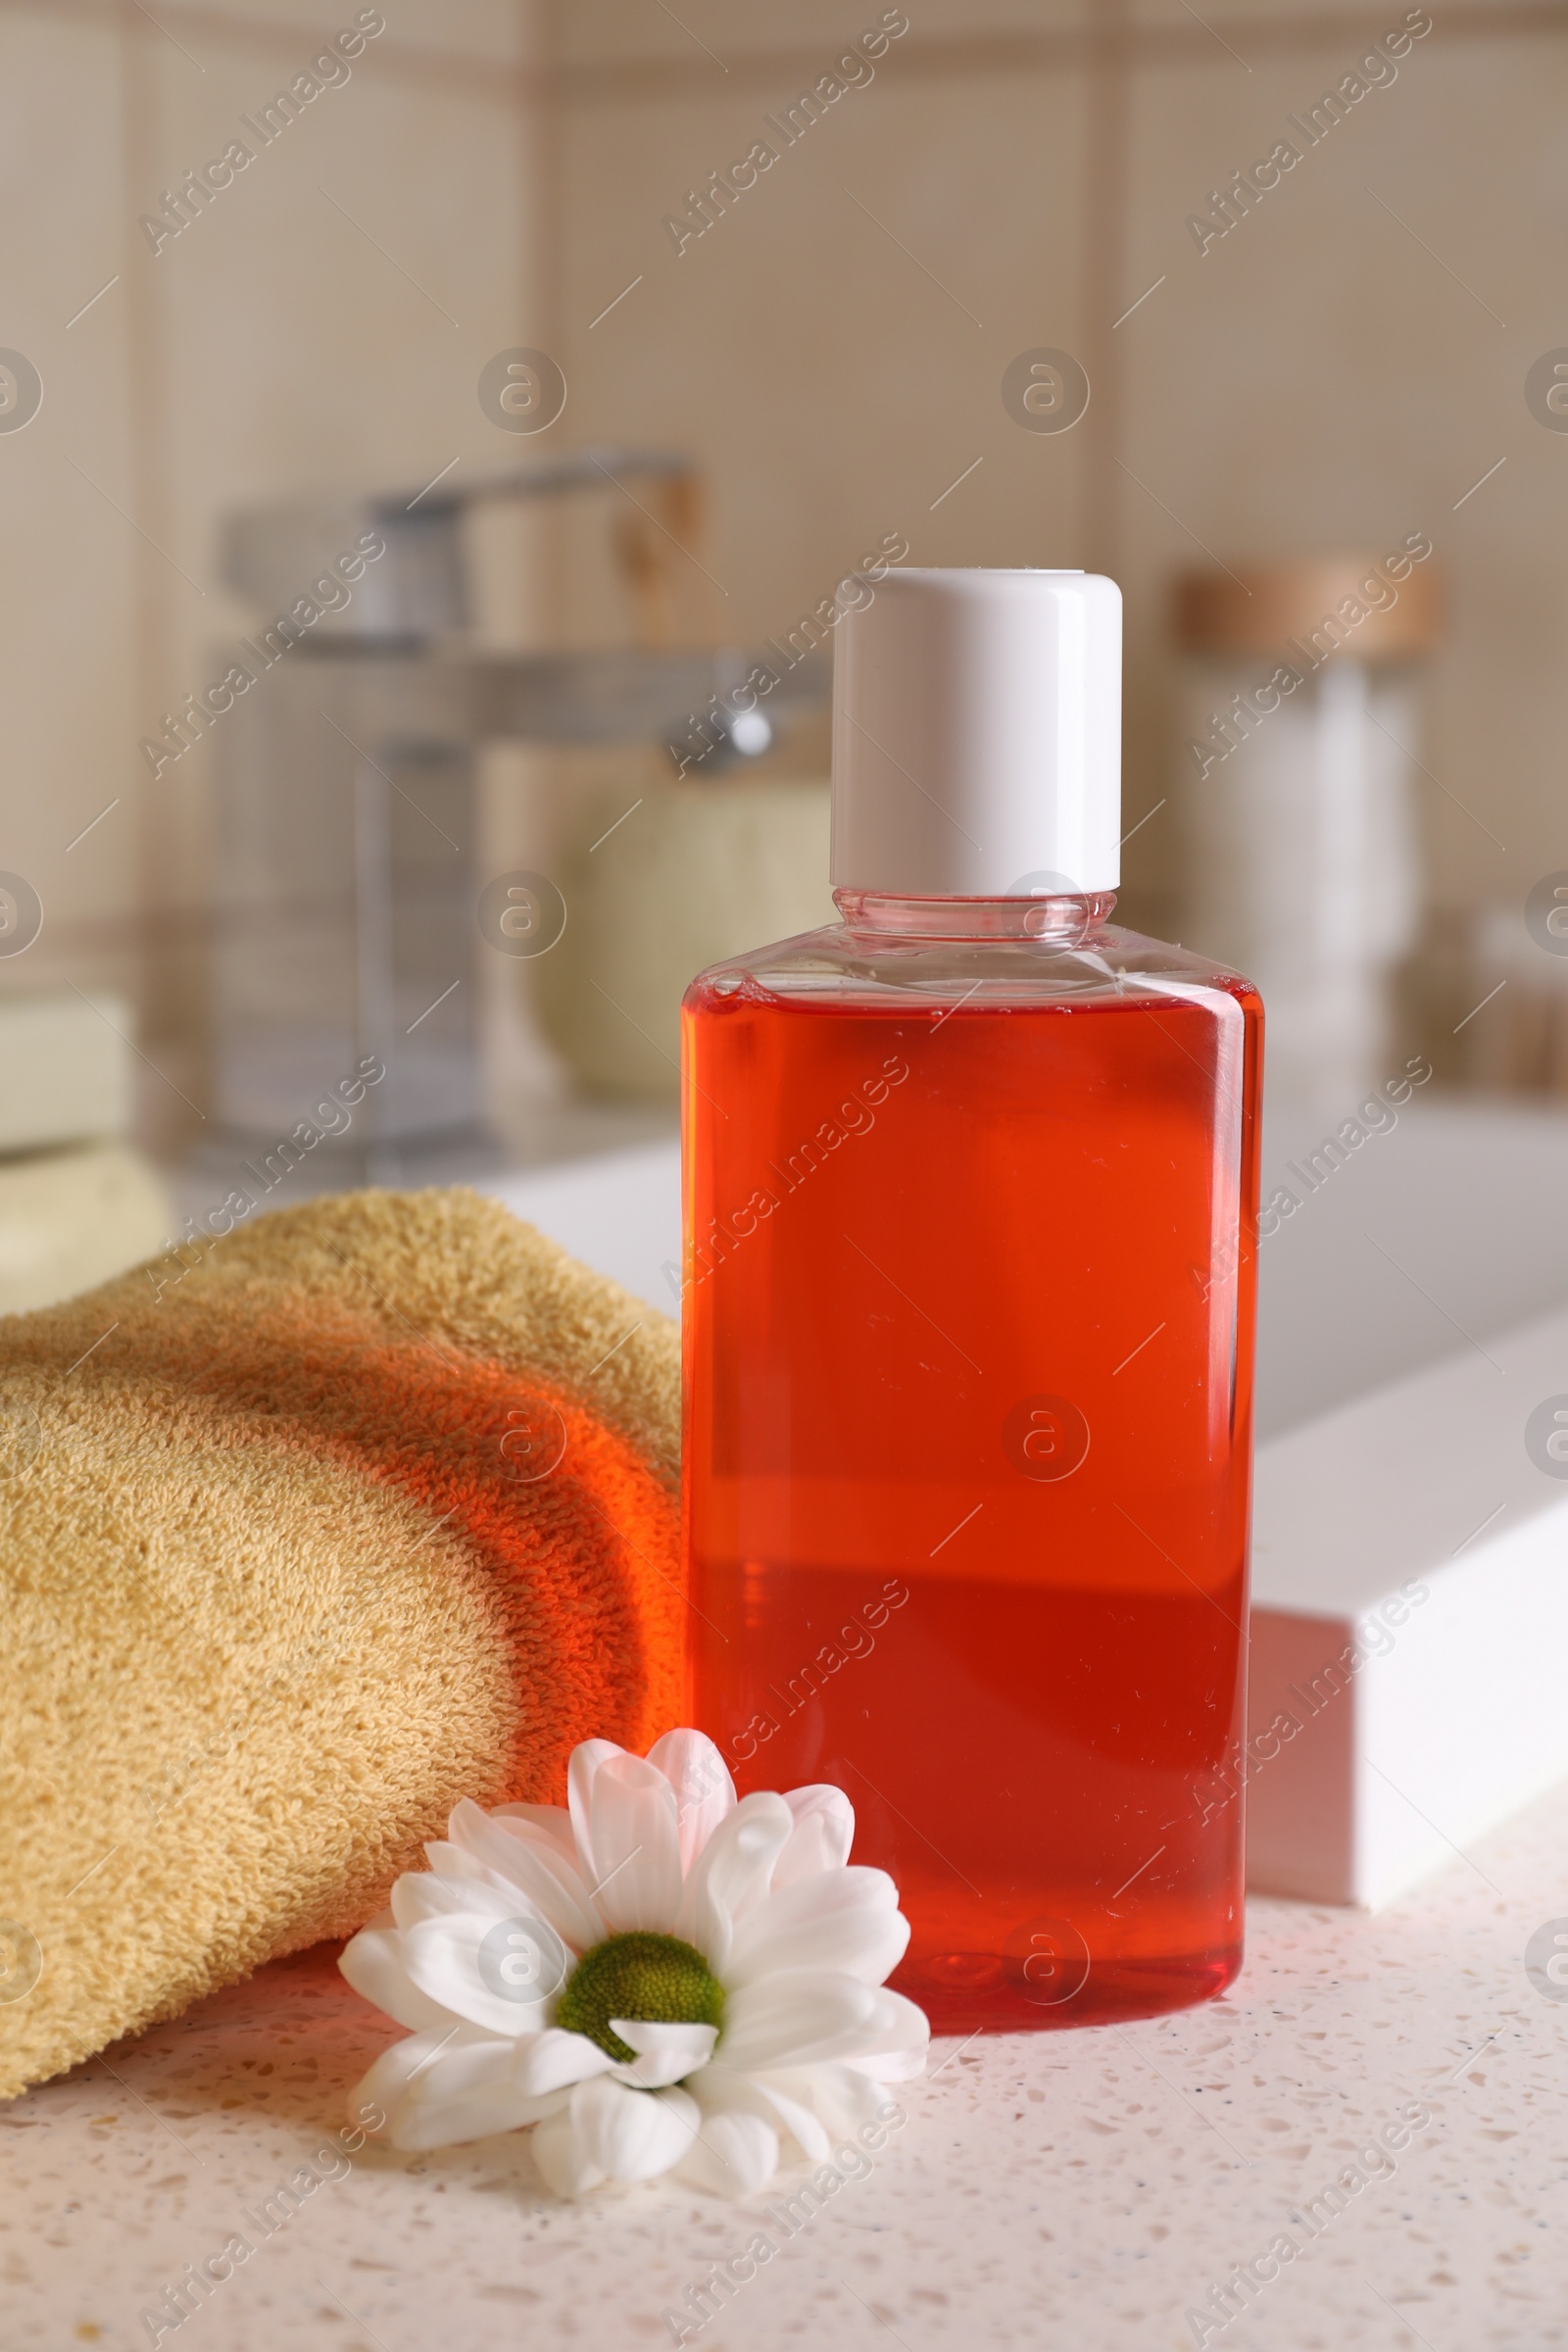 Photo of Fresh mouthwash in bottle, chamomile and towel on countertop near sink in bathroom, closeup